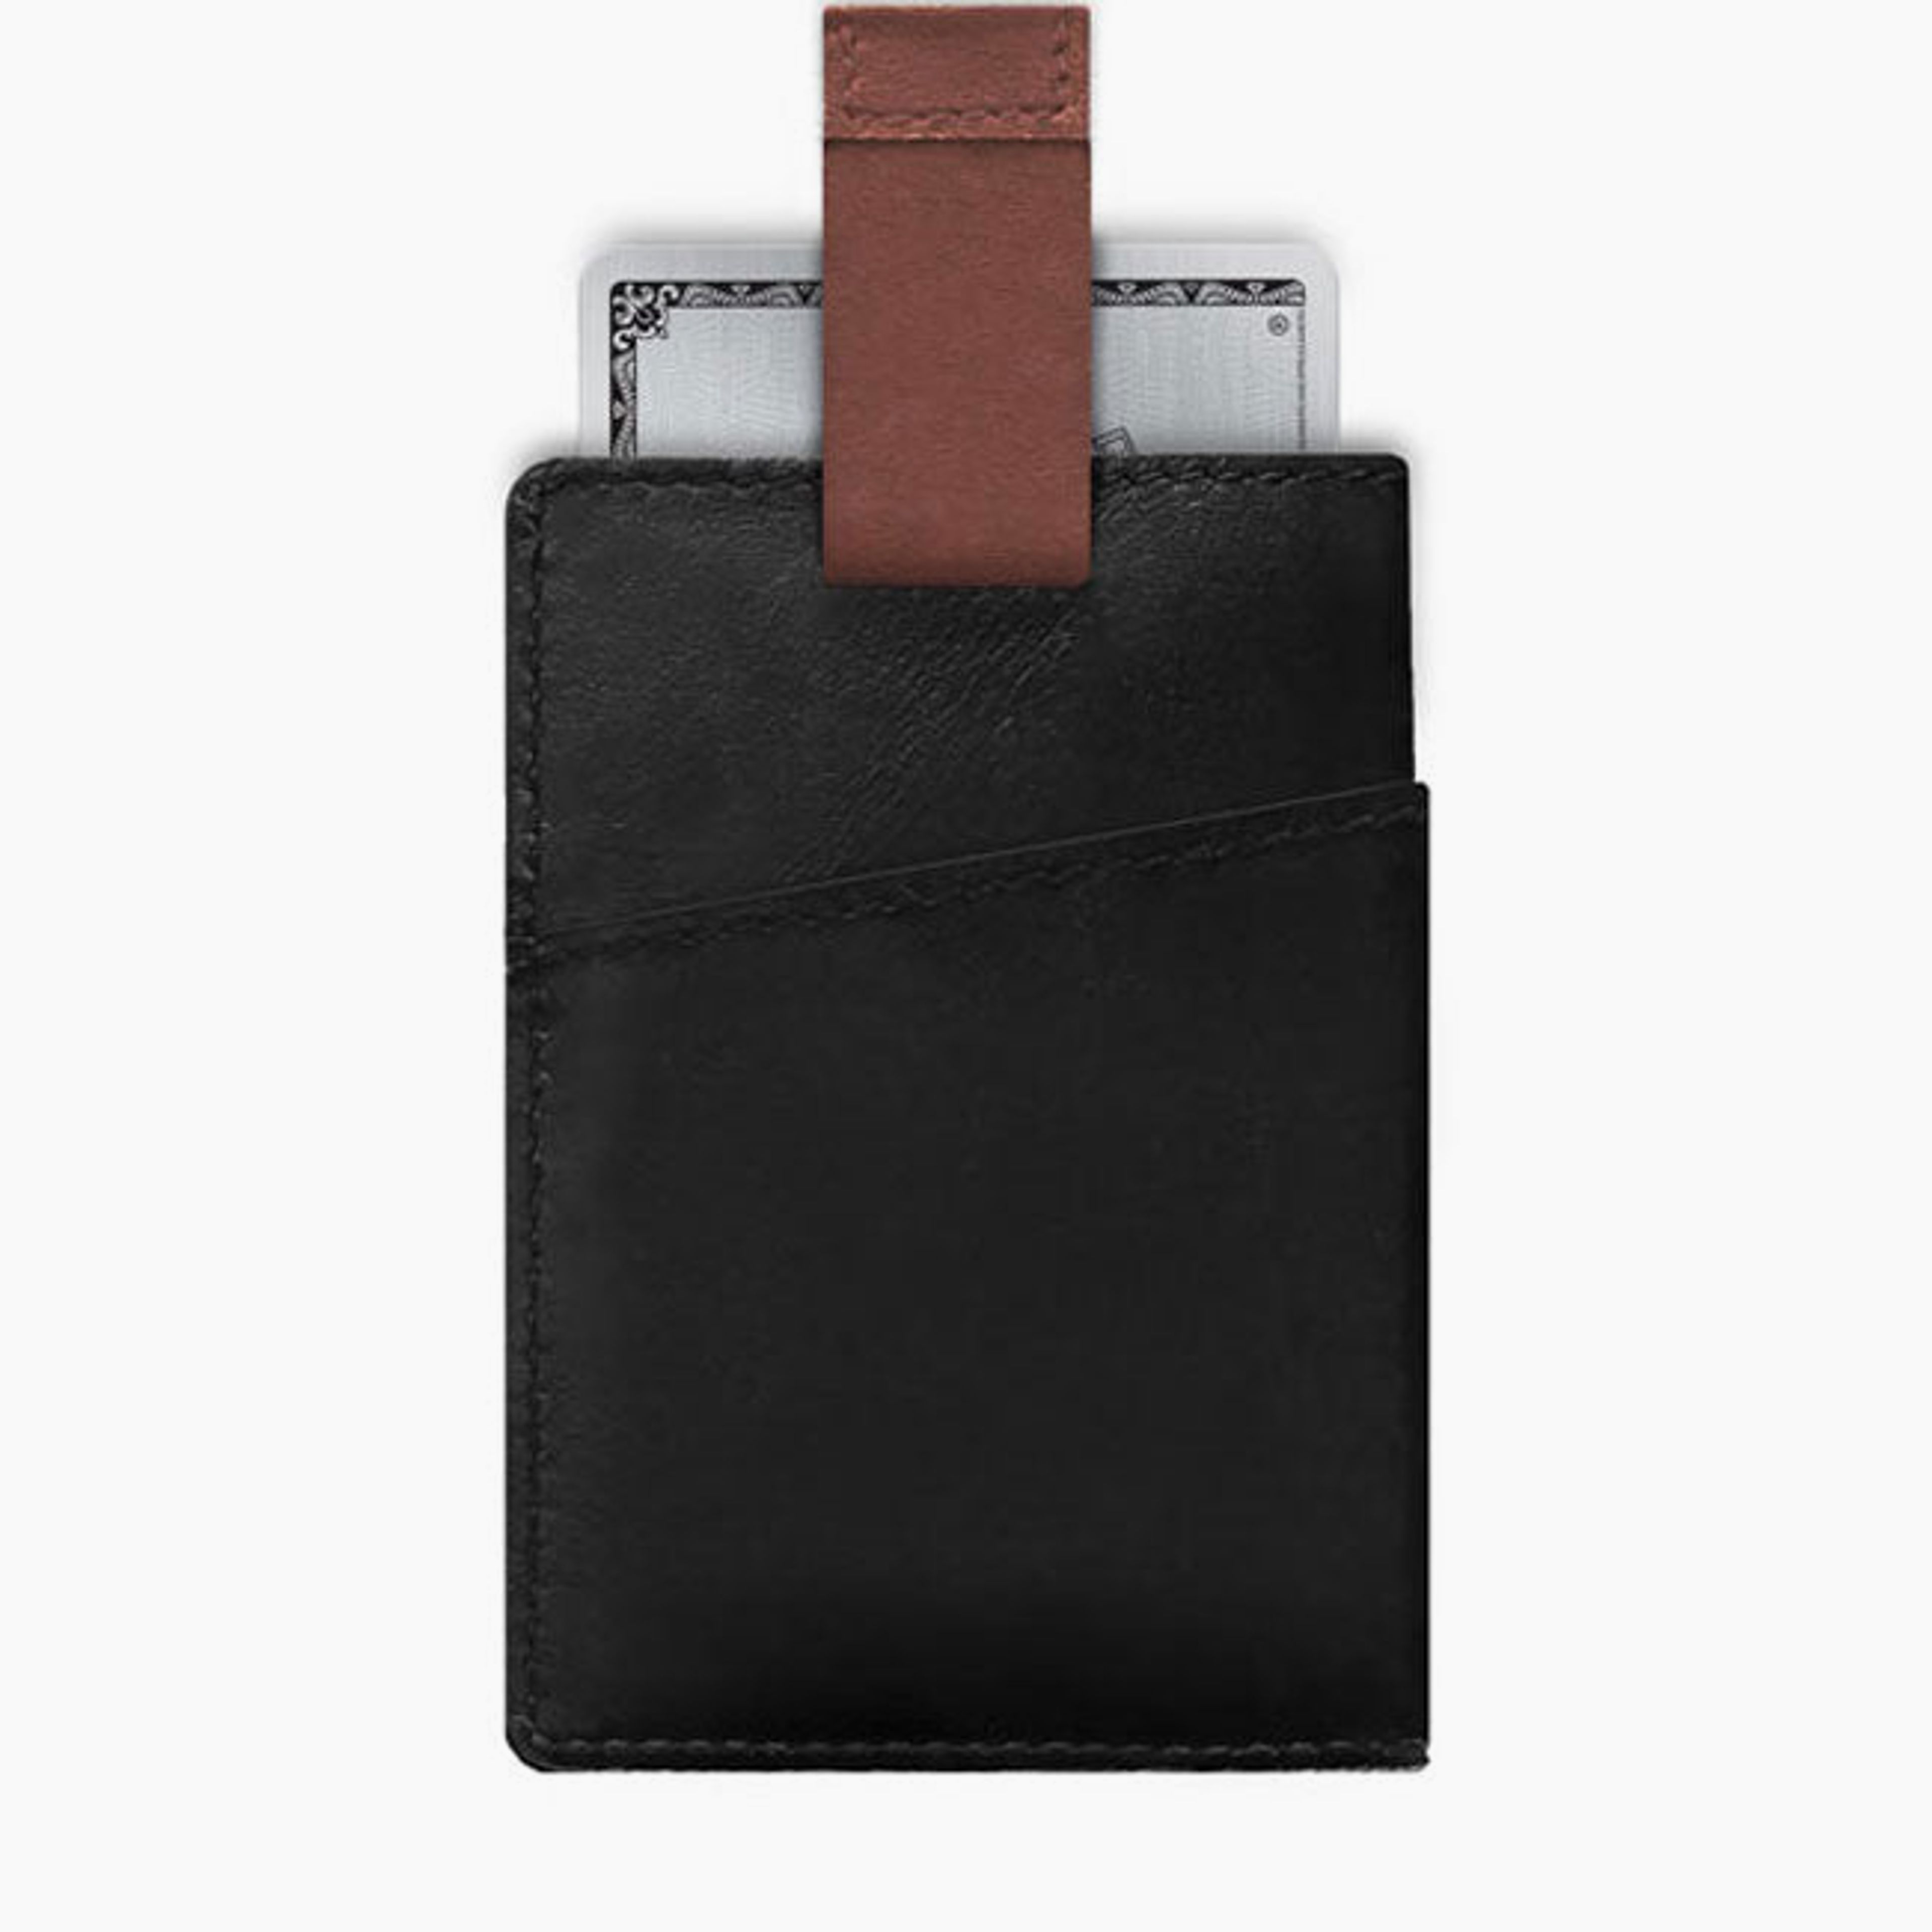 DAVEK CARDSLEEVE with pull tab for easy card access - BLACK